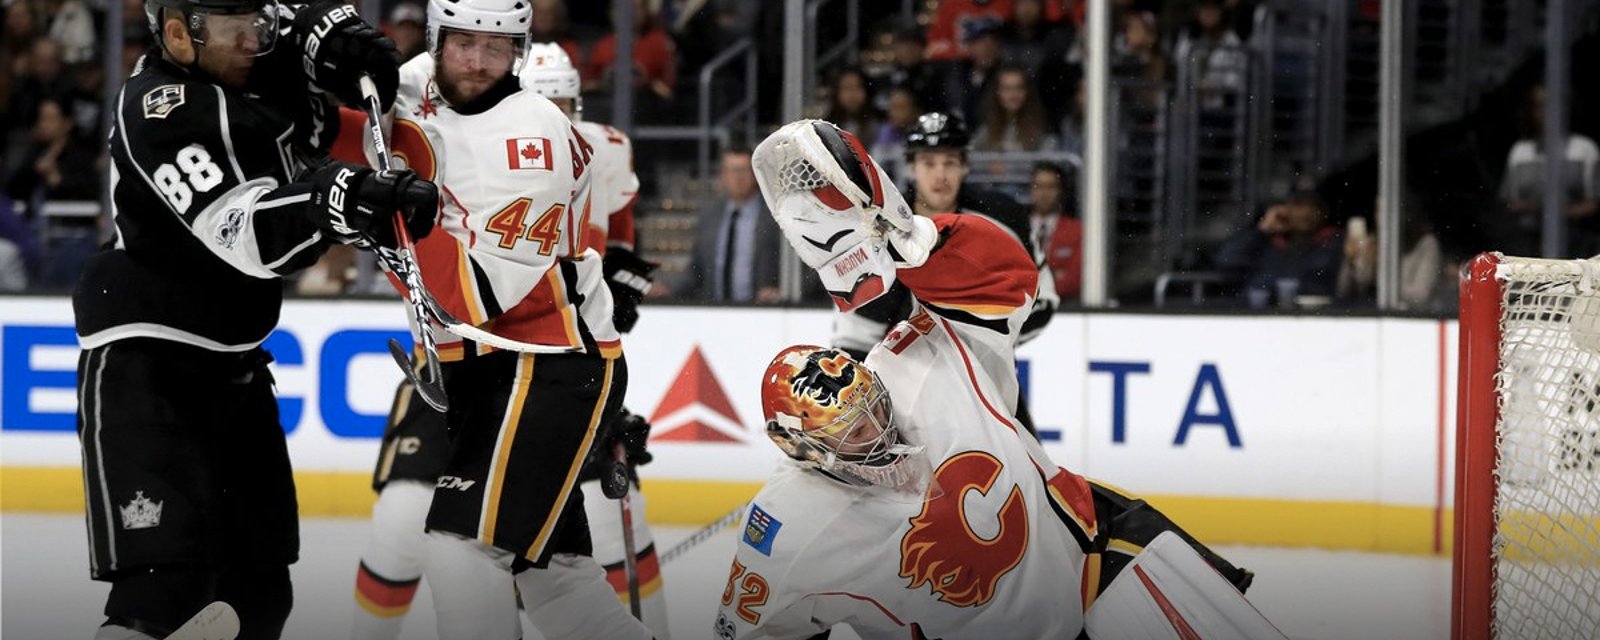 Breaking: AHL demotion signals return of Mike Smith